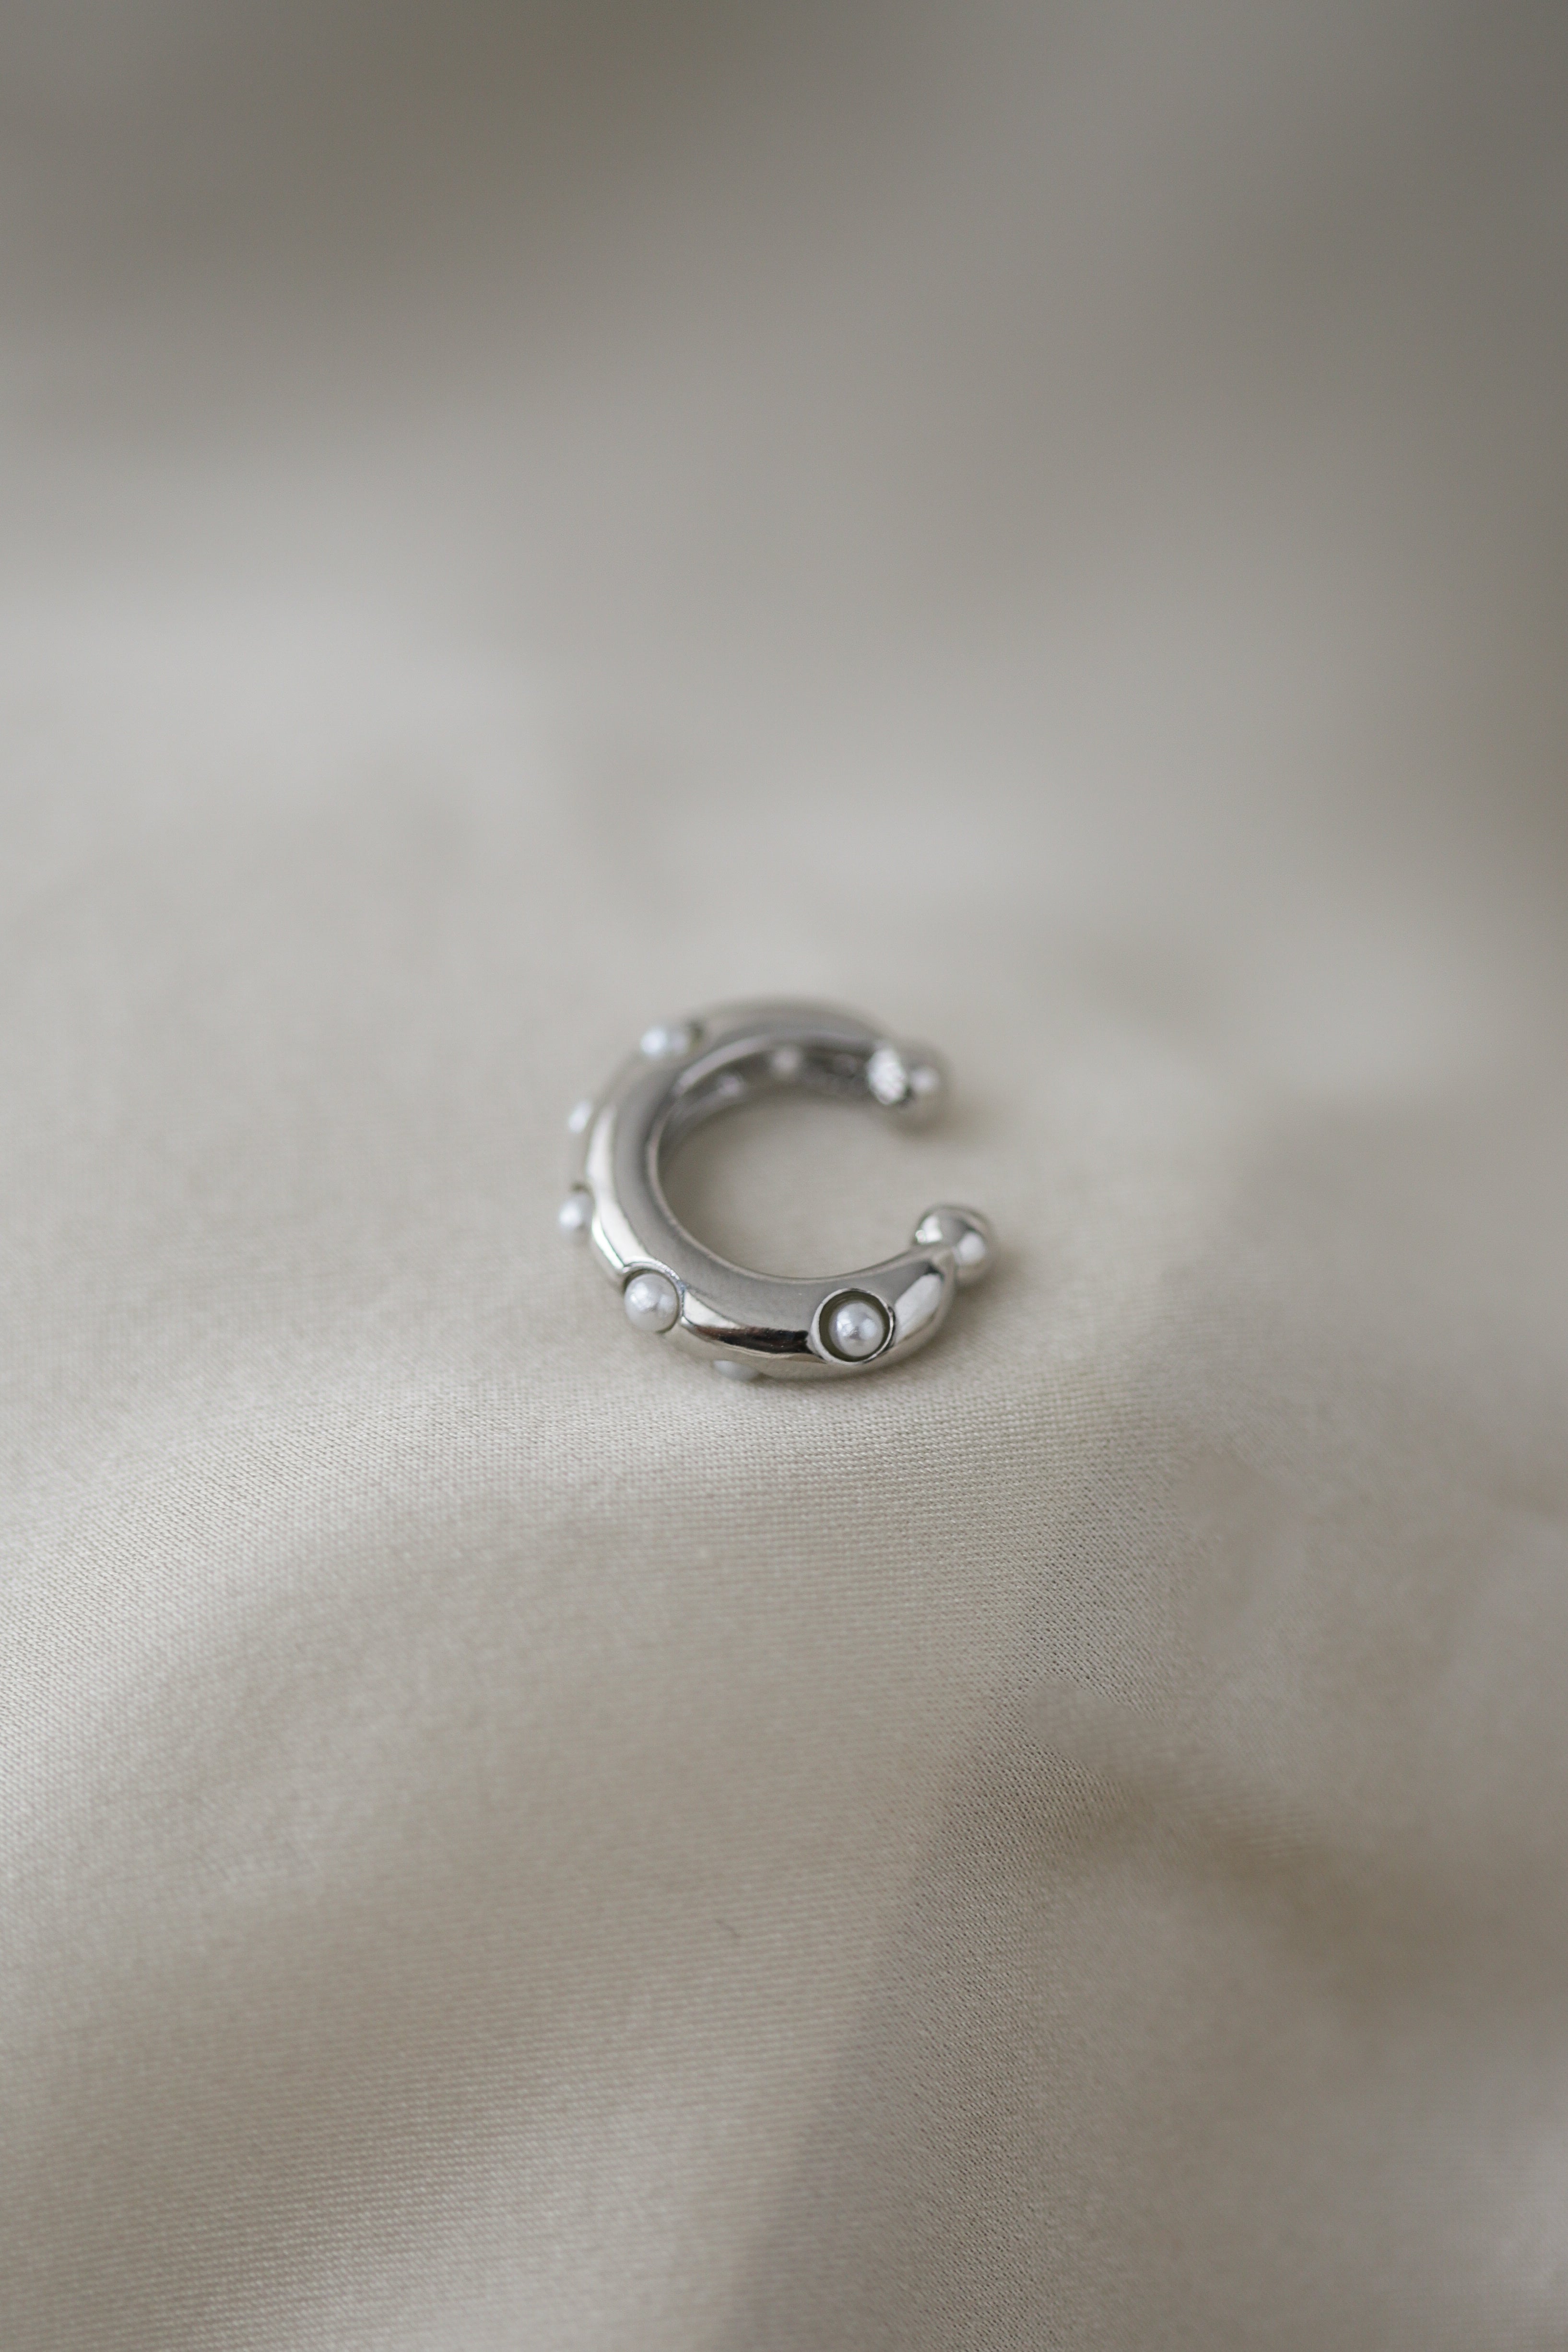 Xanthe Ear Cuff - Boutique Minimaliste has waterproof, durable, elegant and vintage inspired jewelry